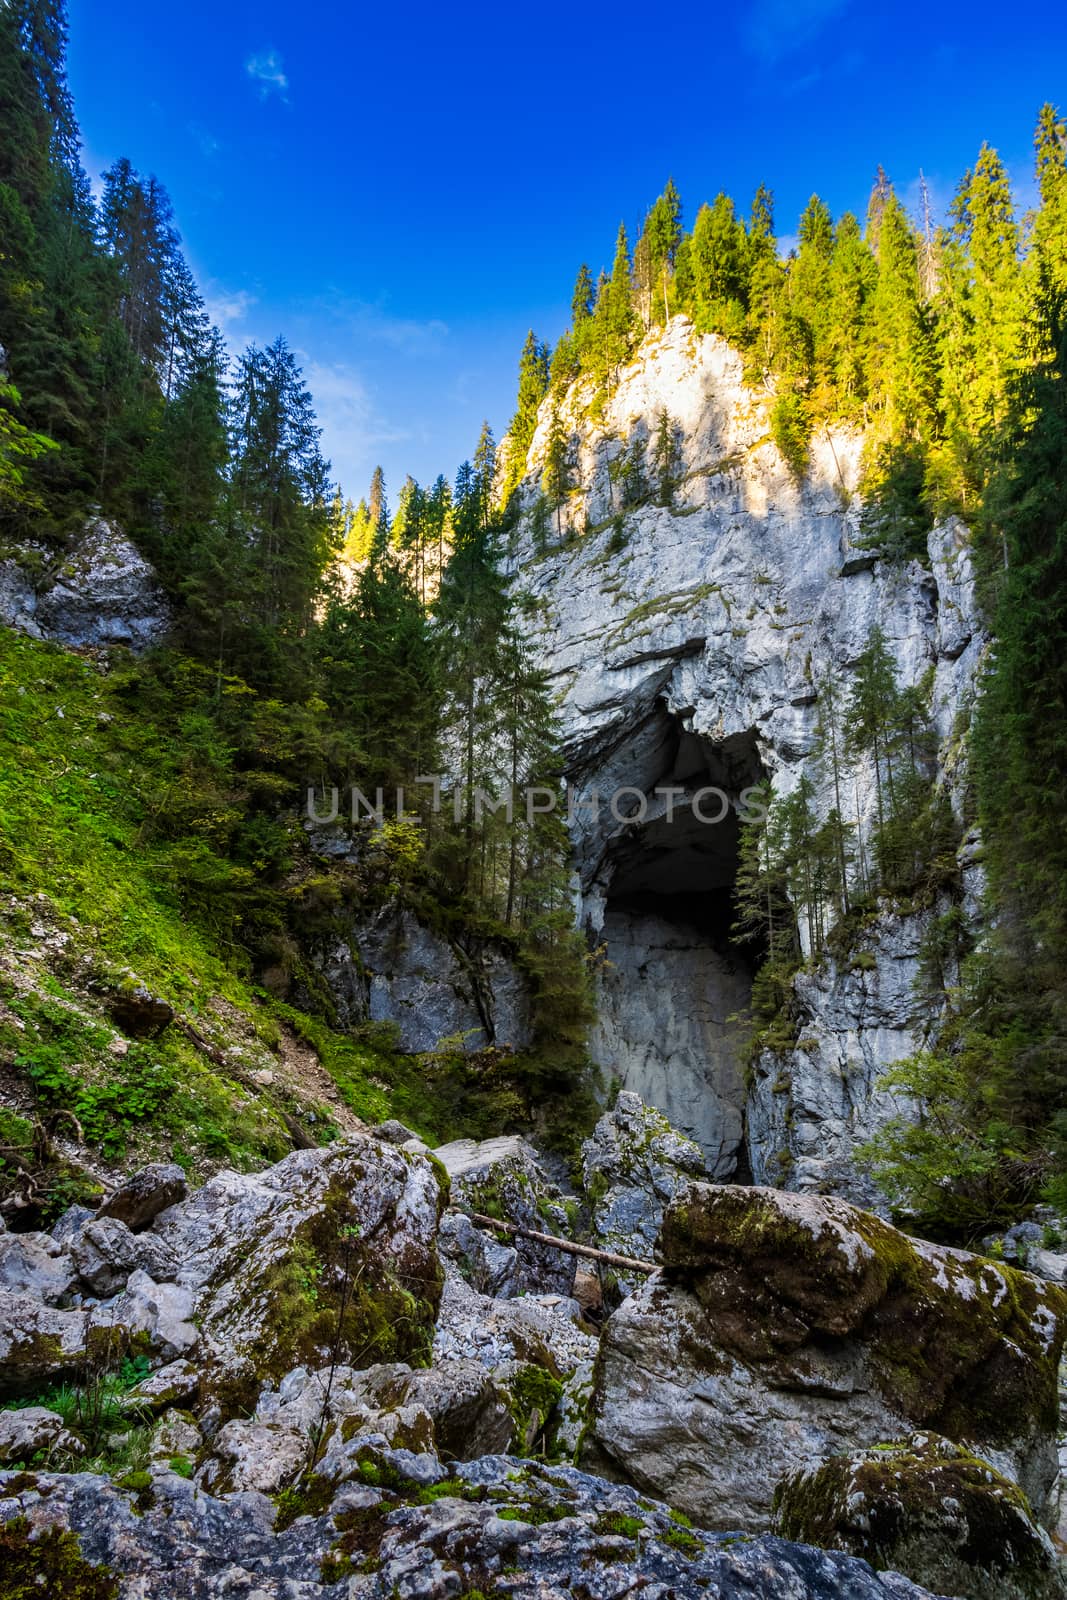 Cetatile cave in romania. Natural citadel sculpted by river in romanian mountains